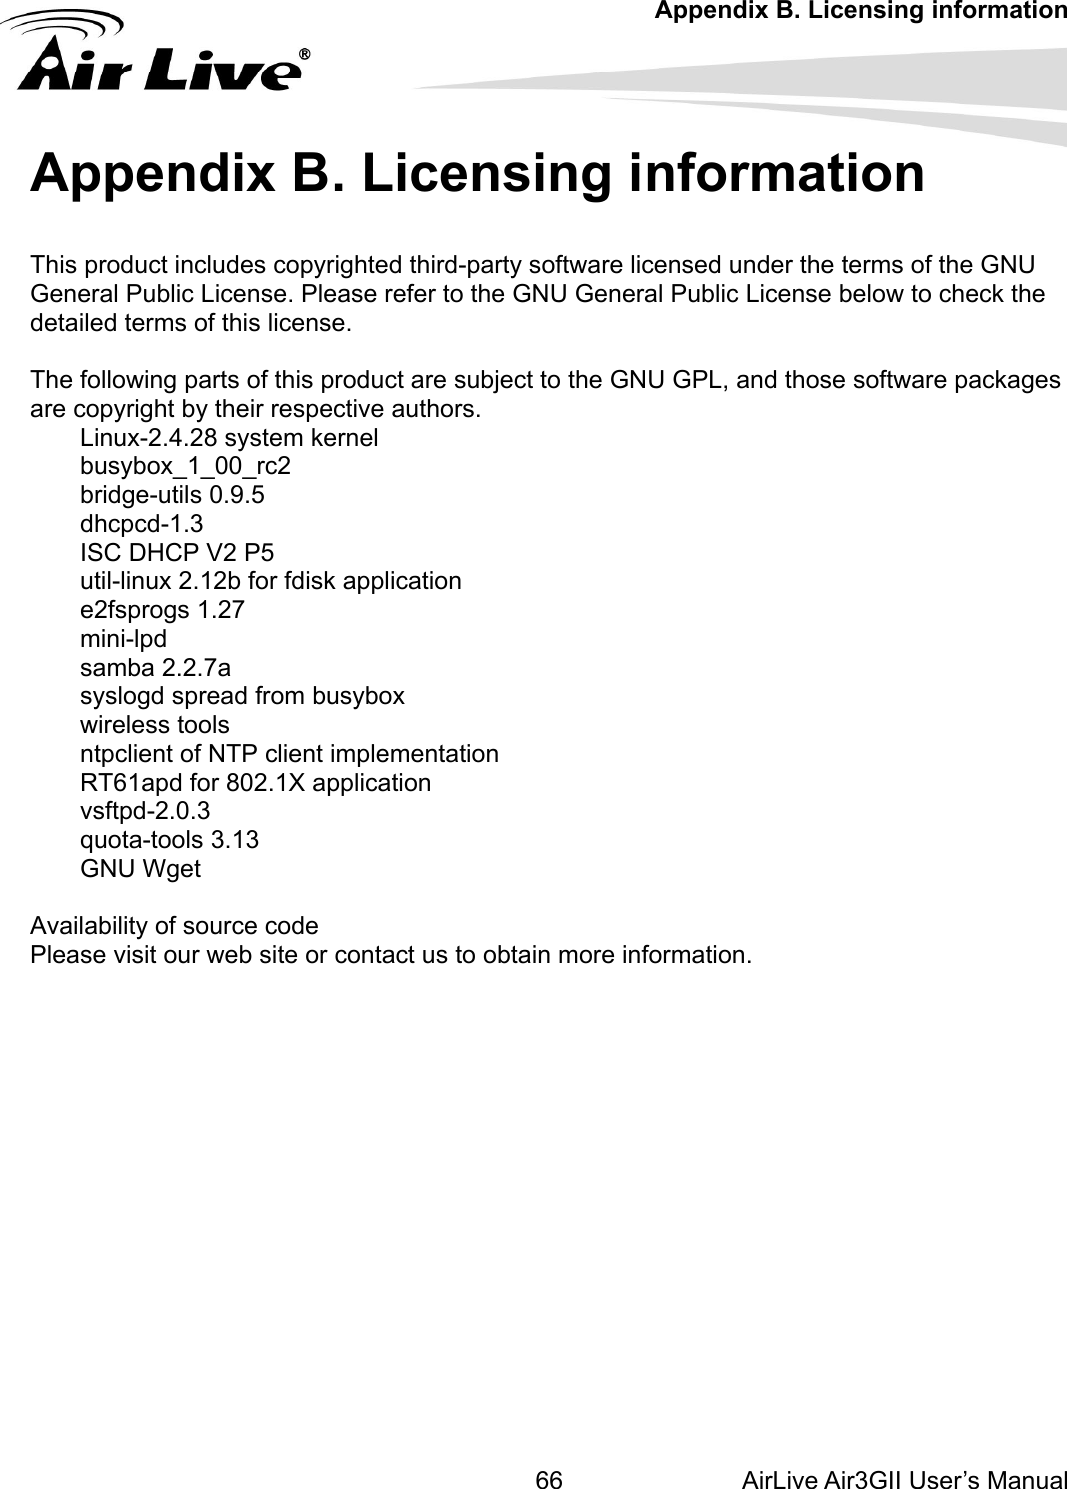 Appendix B. Licensing information AirLive Air3GII User’s Manual 66is product includes copyrighted third-party software licensed under the terms of the GNU eneral se. Ple o the GNU General Public License below to check the detailed  licens The following parts of this p ject to the GNU GPL, and those software packages are copy eir respeLinux-2.4.28 system kernel busybox_1_00_rc2 bridge-utilsdhcpcdISC DHCP V2 P5 util-lin fdiske2fsprogs 1.27 minsamsyslogd spread from buwirelentpclient of NTP client iRT61a .1X apvsftpd-quota-tGNU Wget  Availability of source code Please vis    Appendix B. Licensing information hTG  Public Licenisase refer t terms of th e. roduct are subctive authors. right by th 0.9.5 -1.3 ux 2.12b for   application i-lpd ba 2.2.7a sybox ss tools mplementation pd for 802 plication 2.0.3 ools 3.13 it our web site or contact us to obtain more information.  